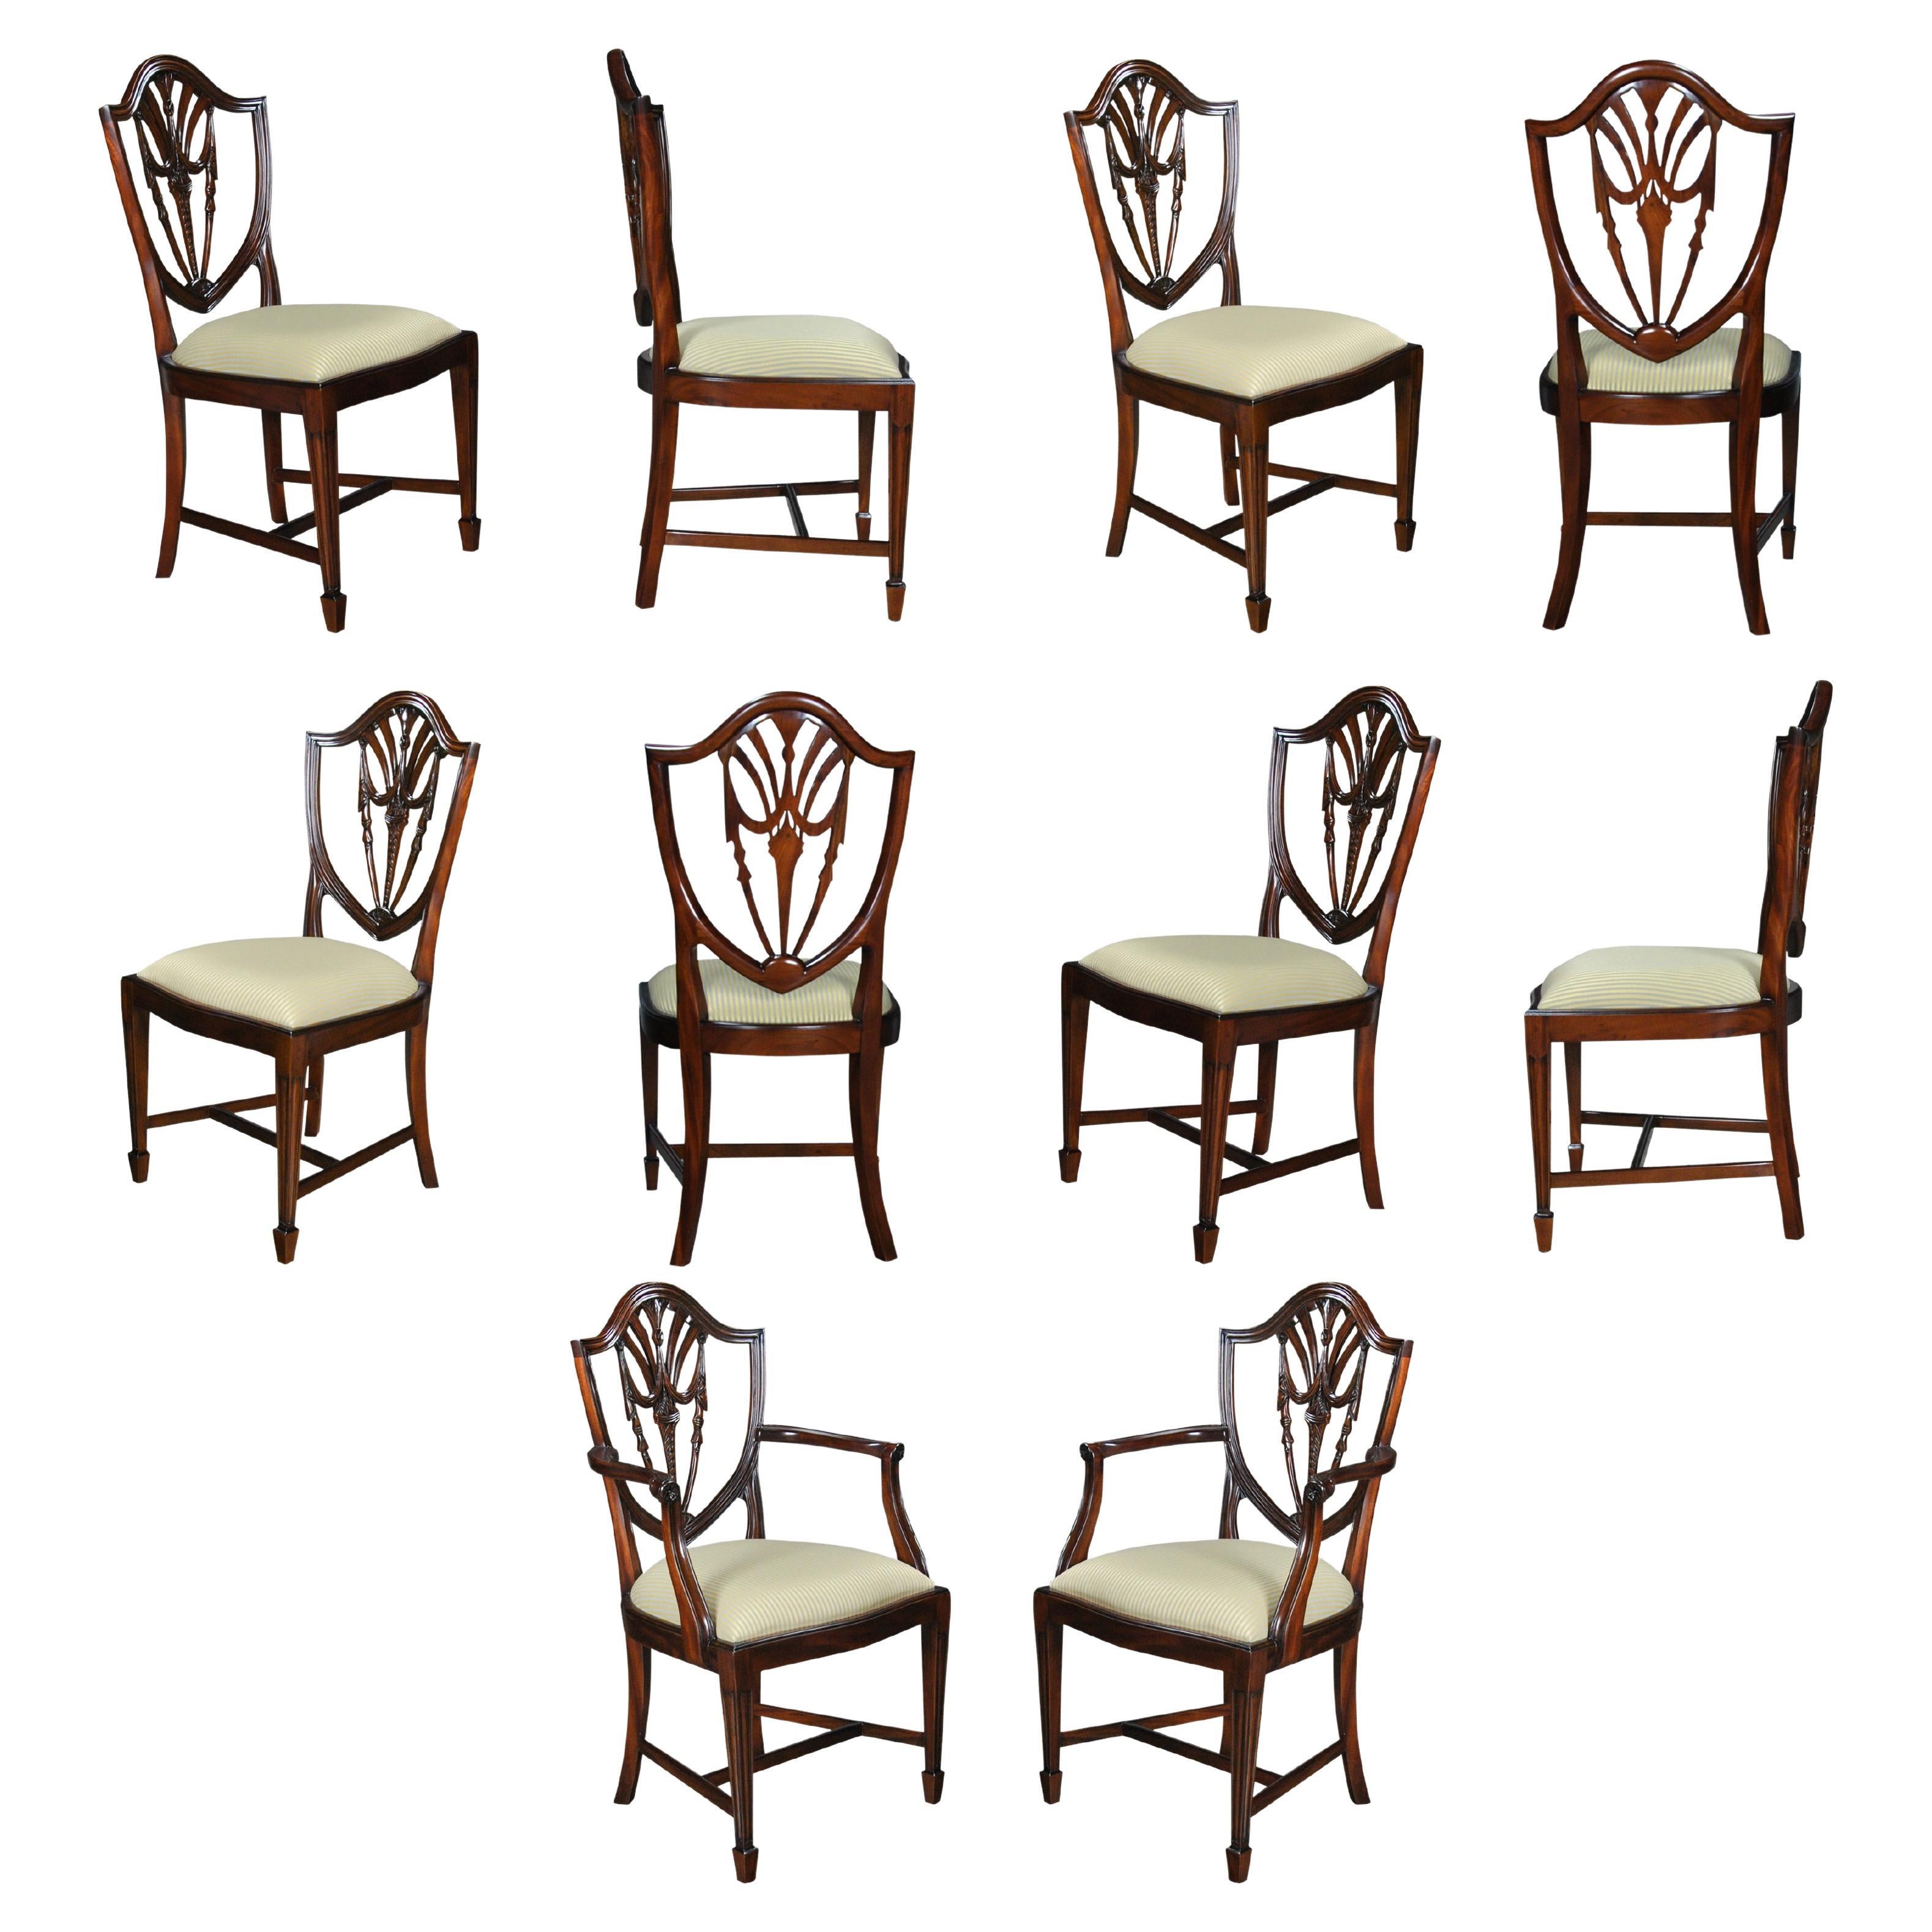 What are cross back chairs called?